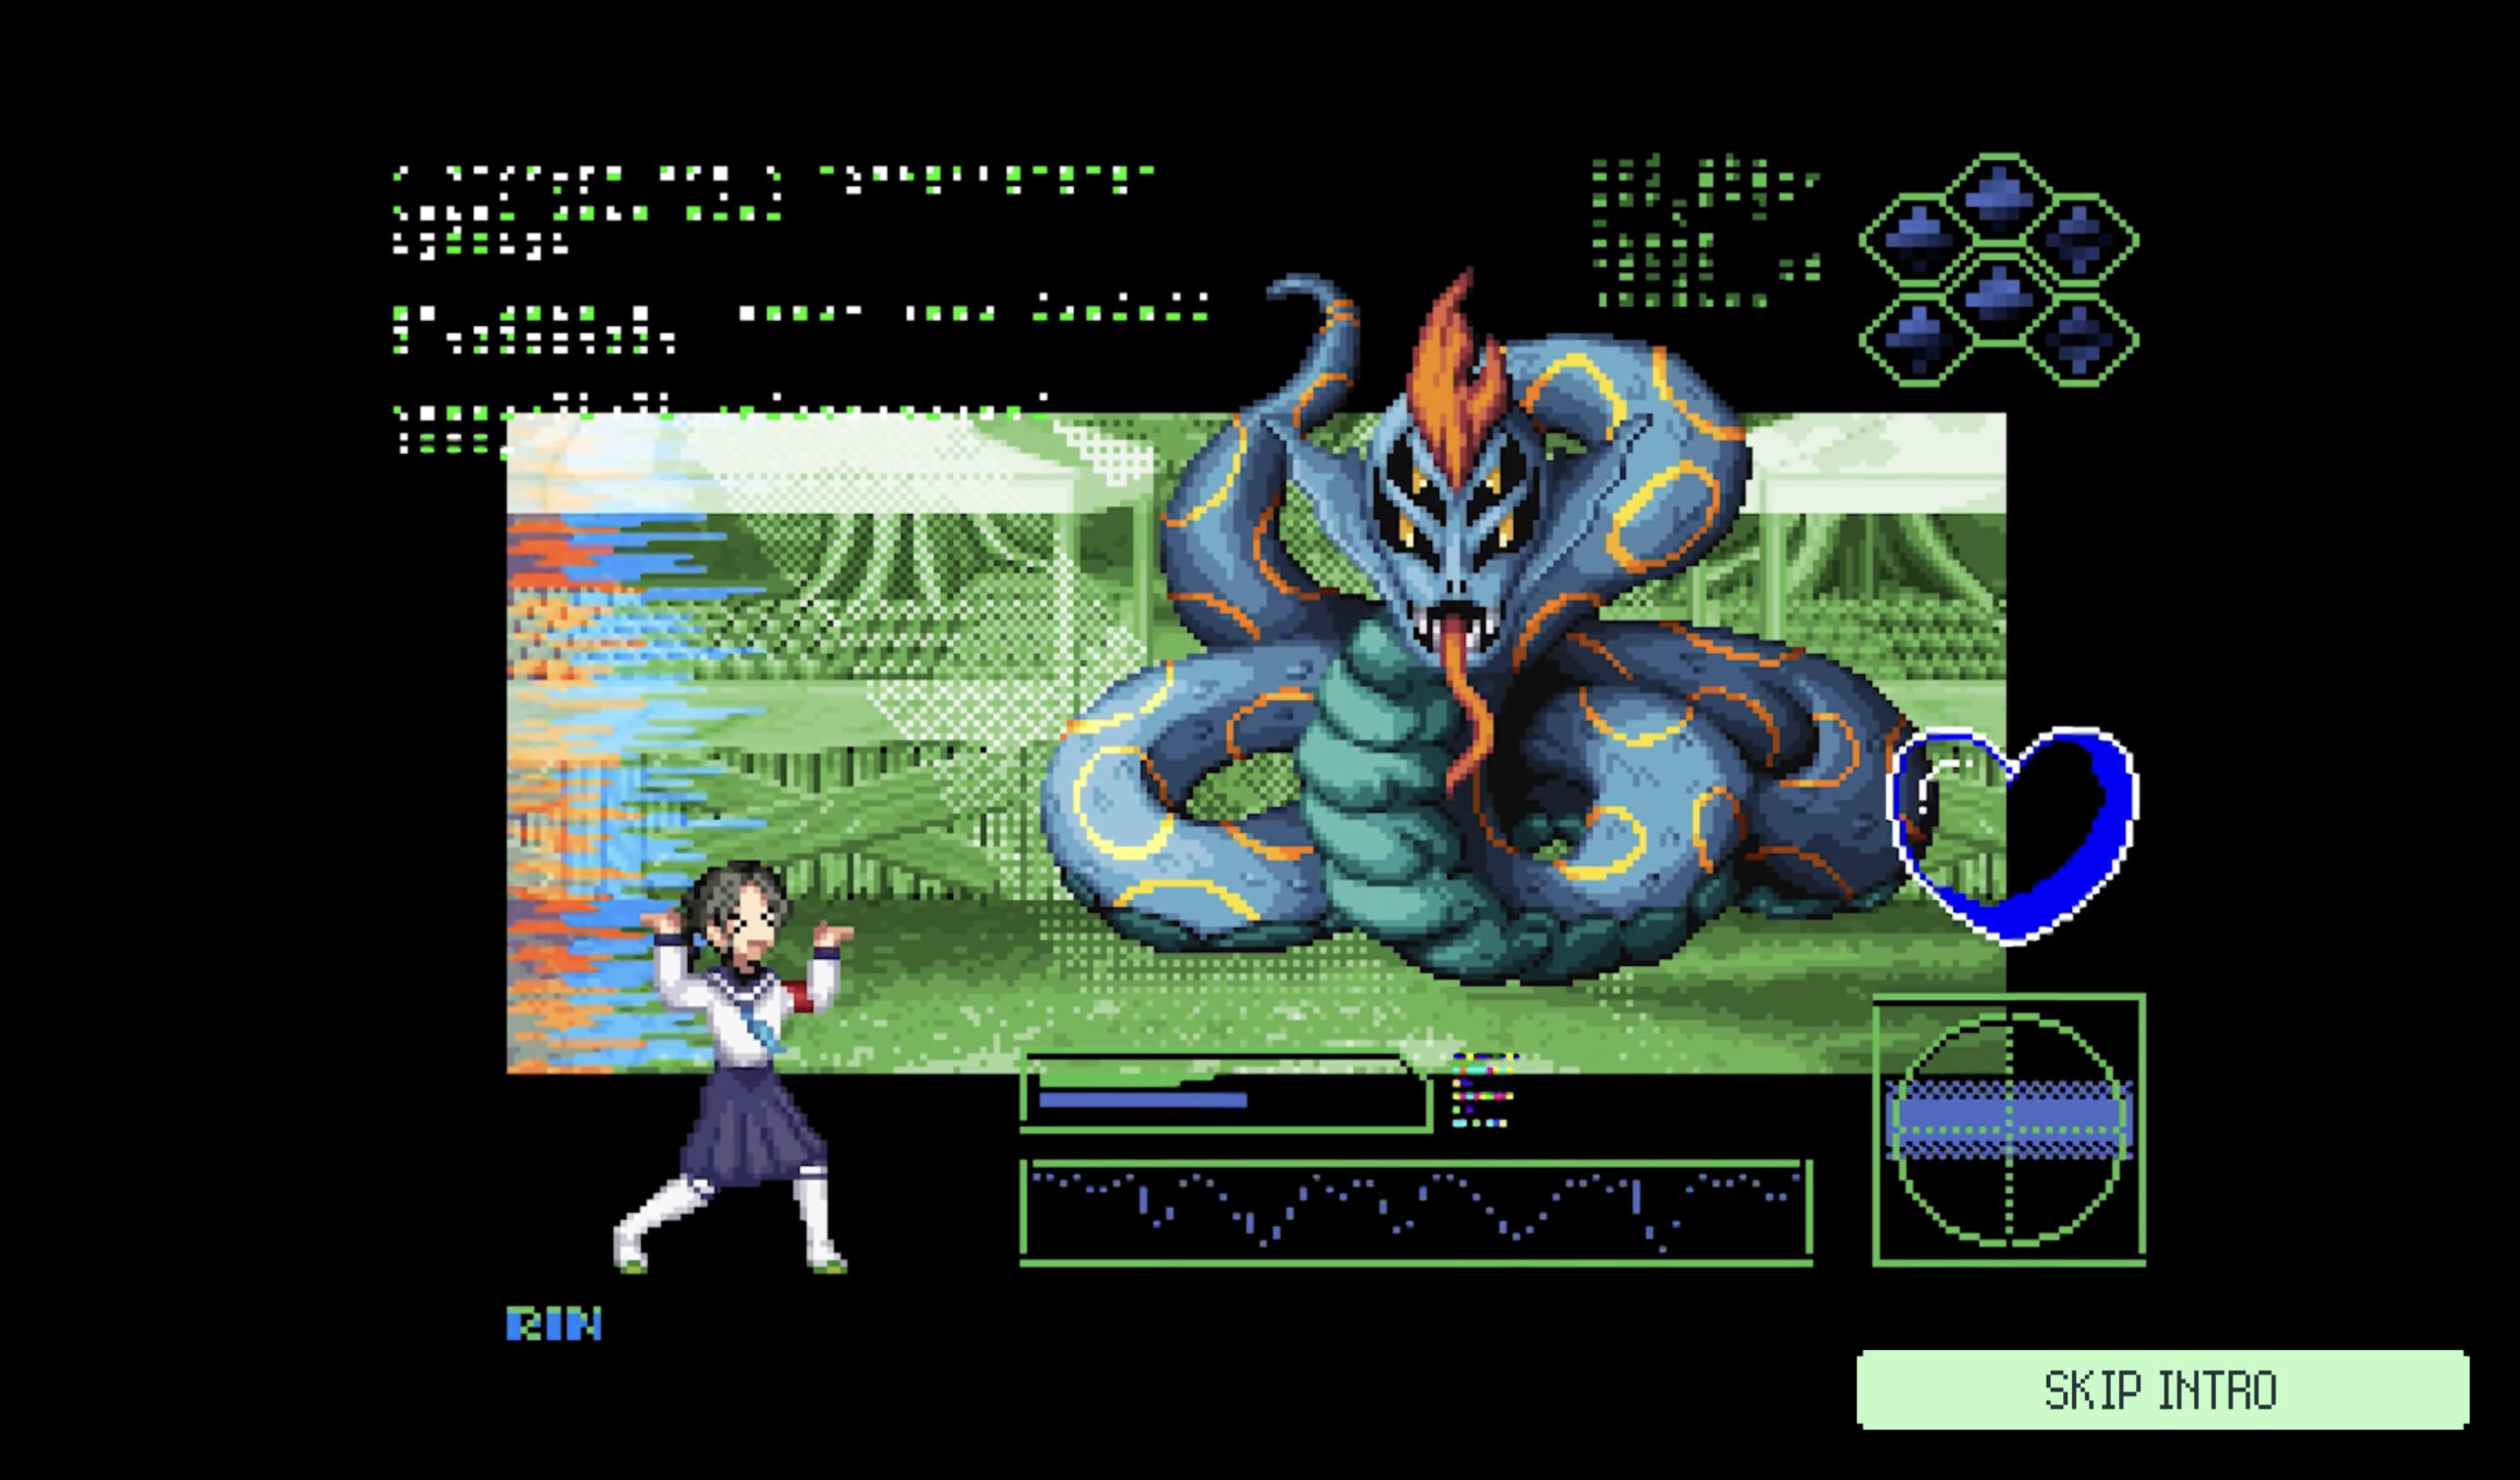 A screenshot of the experience showing a girl battling a monster.